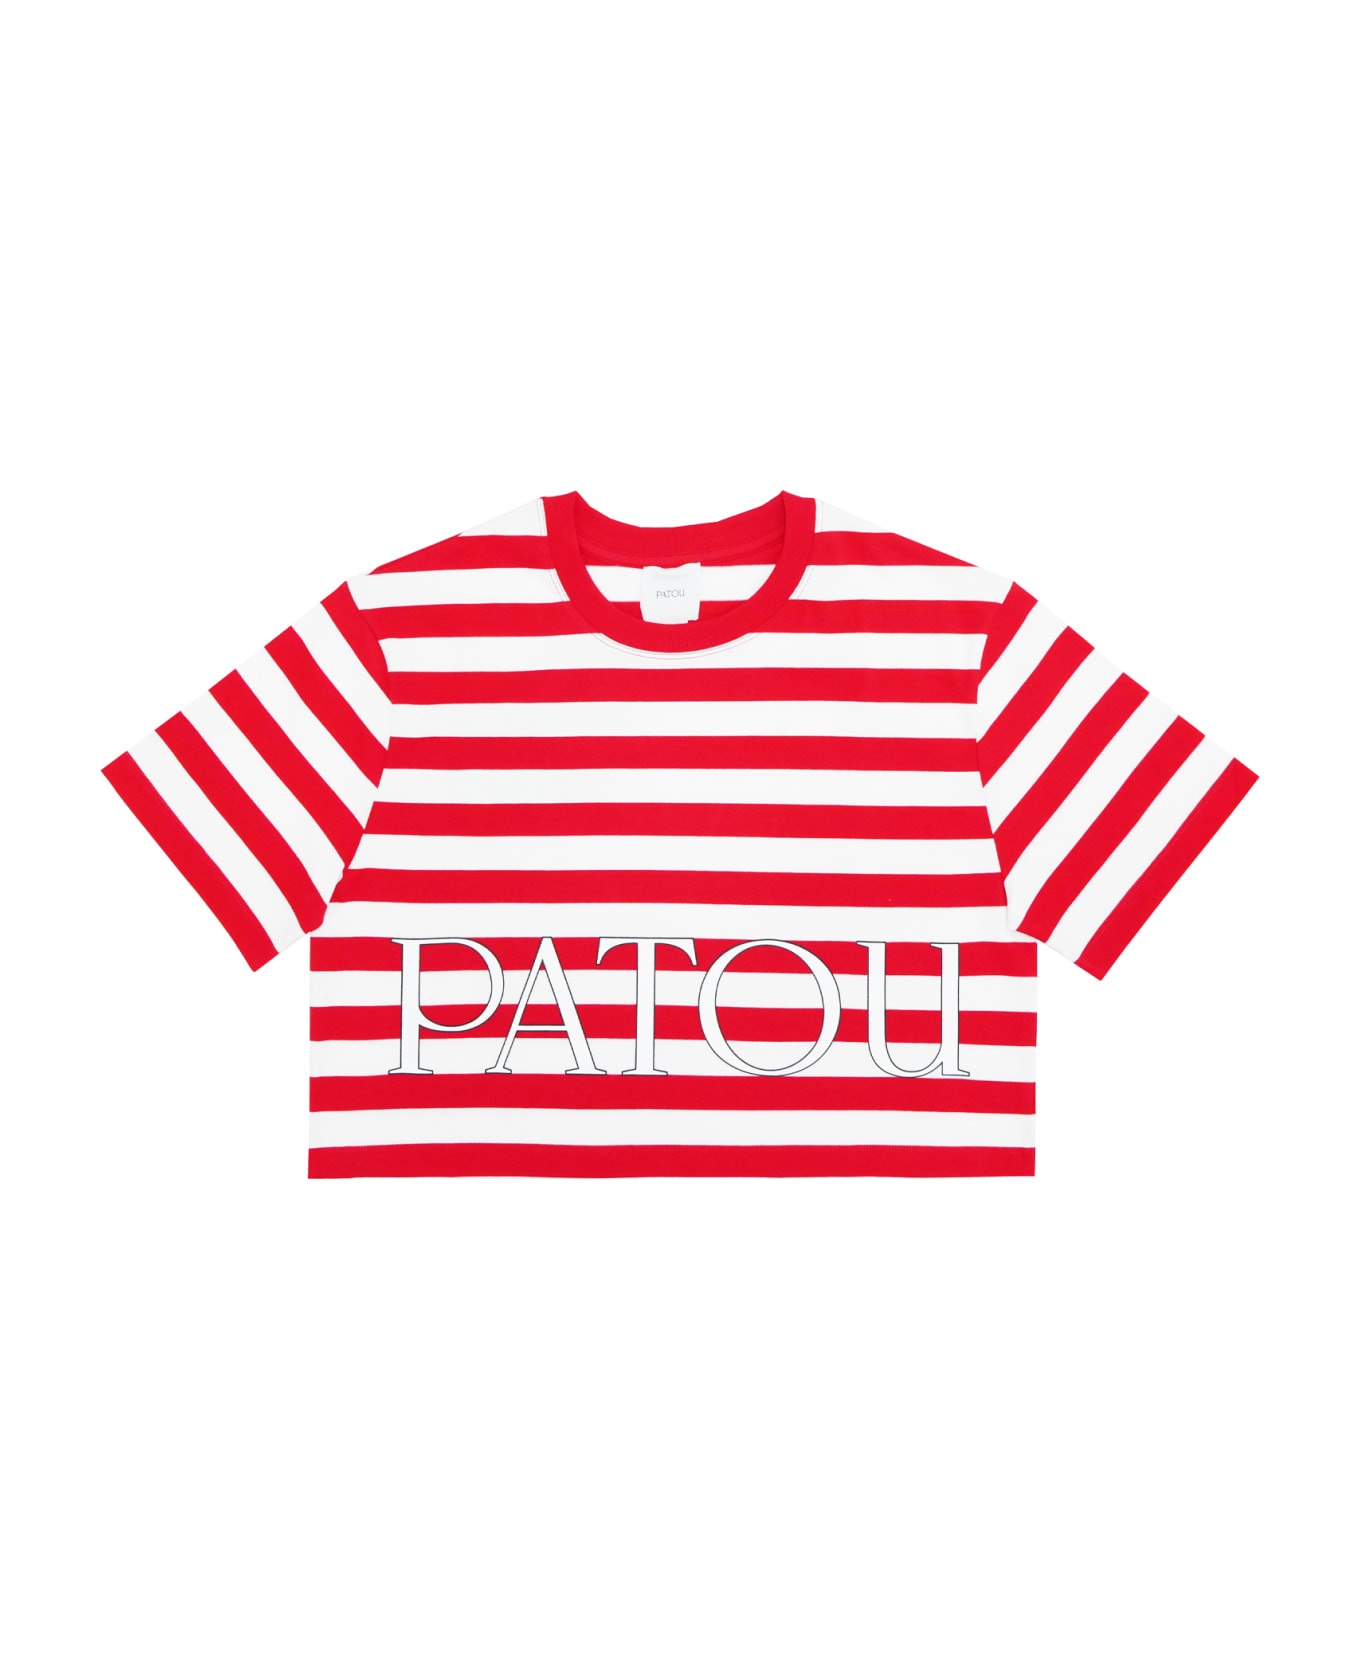 Patou T-shirt - Red Tシャツ